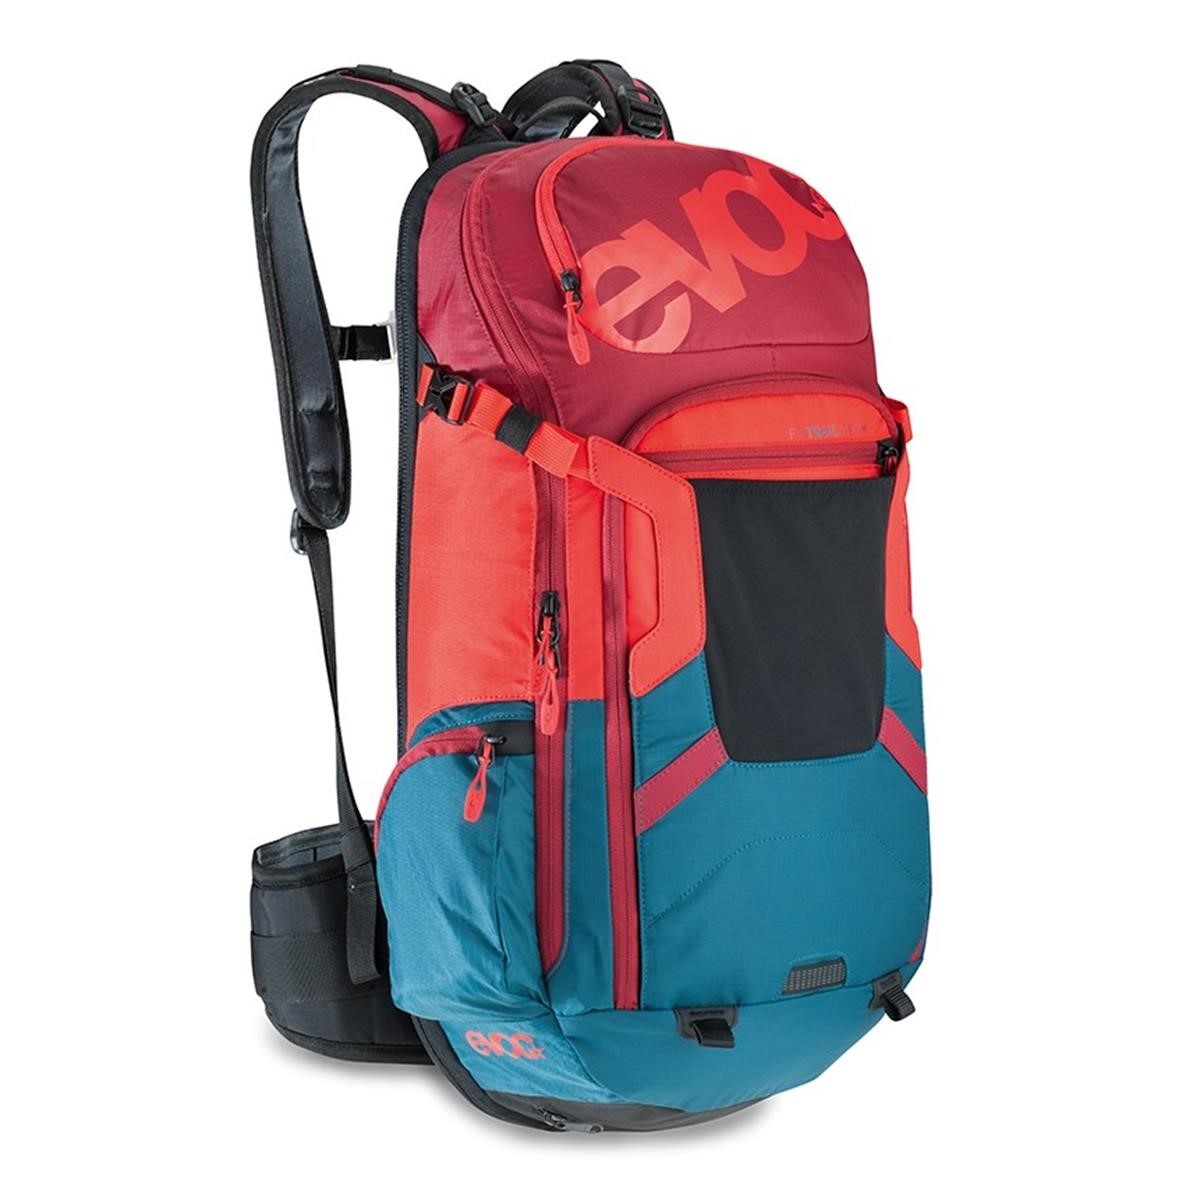 Evoc Prozektor Backpack with Hydration System Compartment FR Trail Team - Petrol/Red/Ruby, 20 Liter